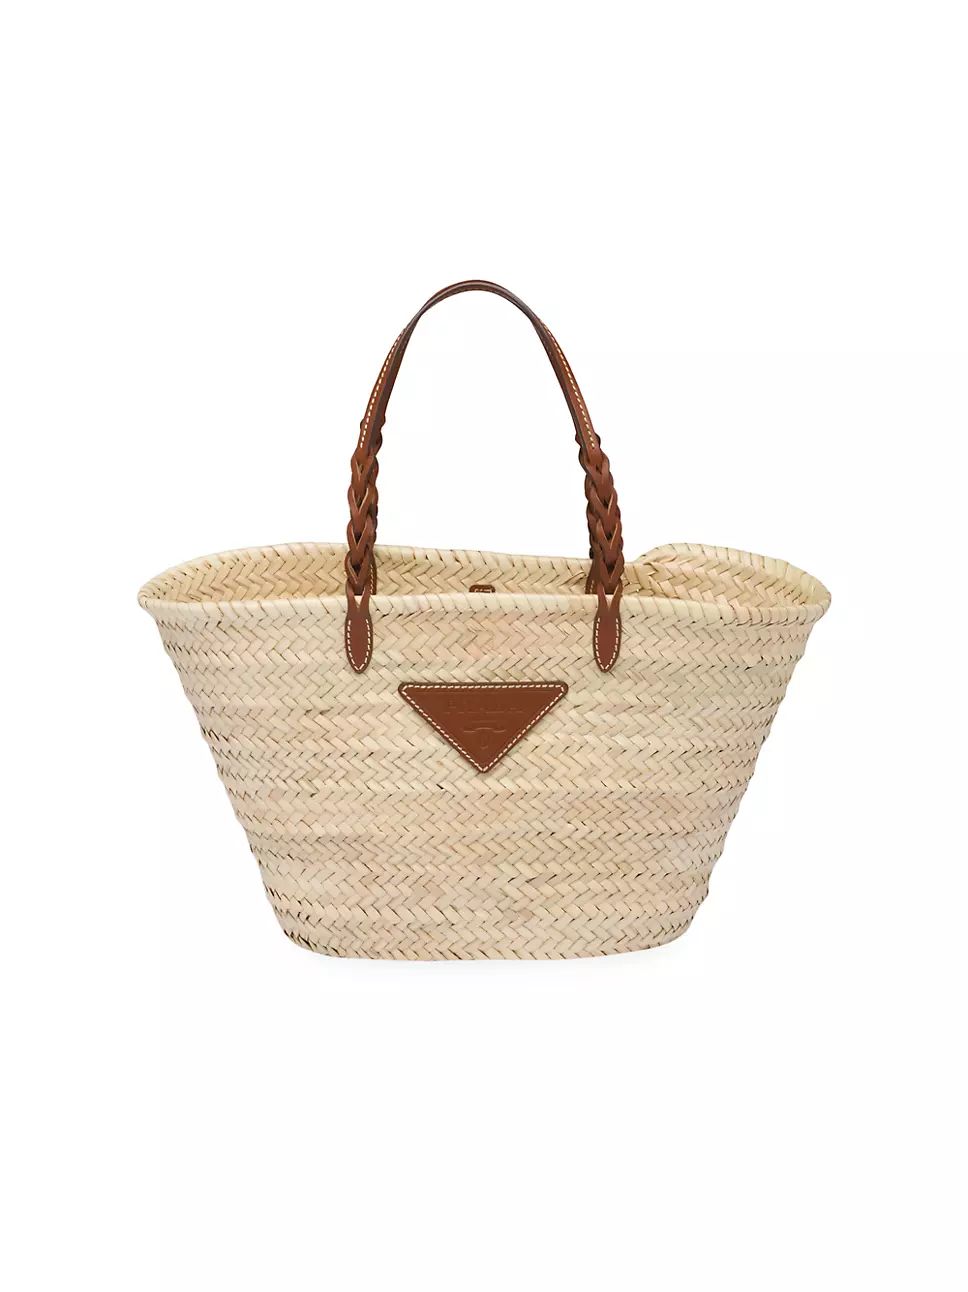 Woven Palmito And Leather Tote Bag | Saks Fifth Avenue